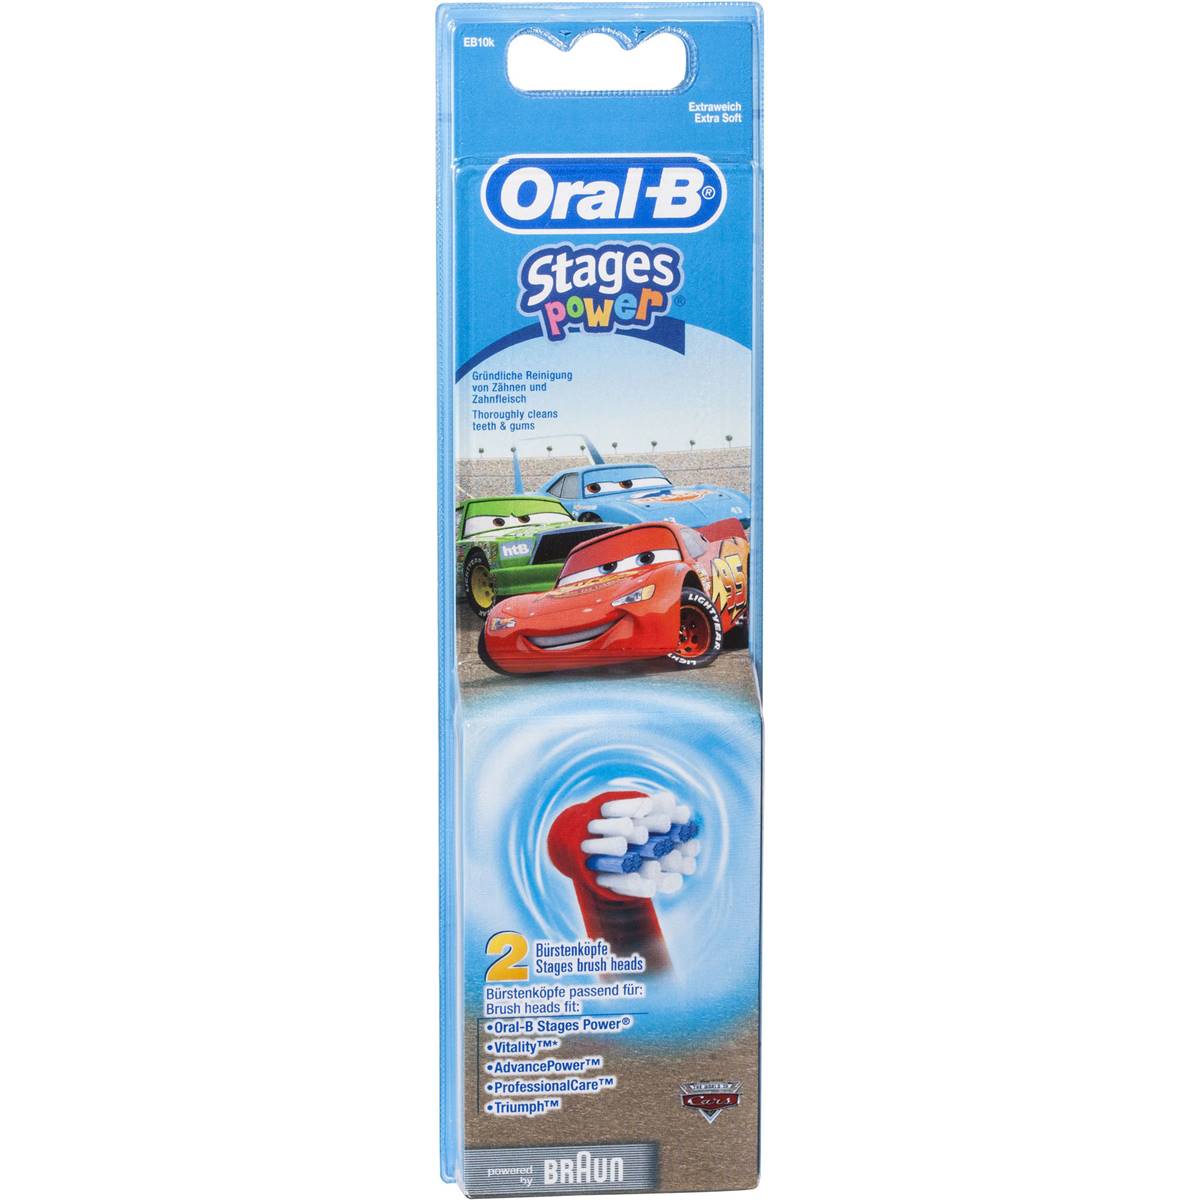 Oral-b Stages Powered Toothbrush Head Disney